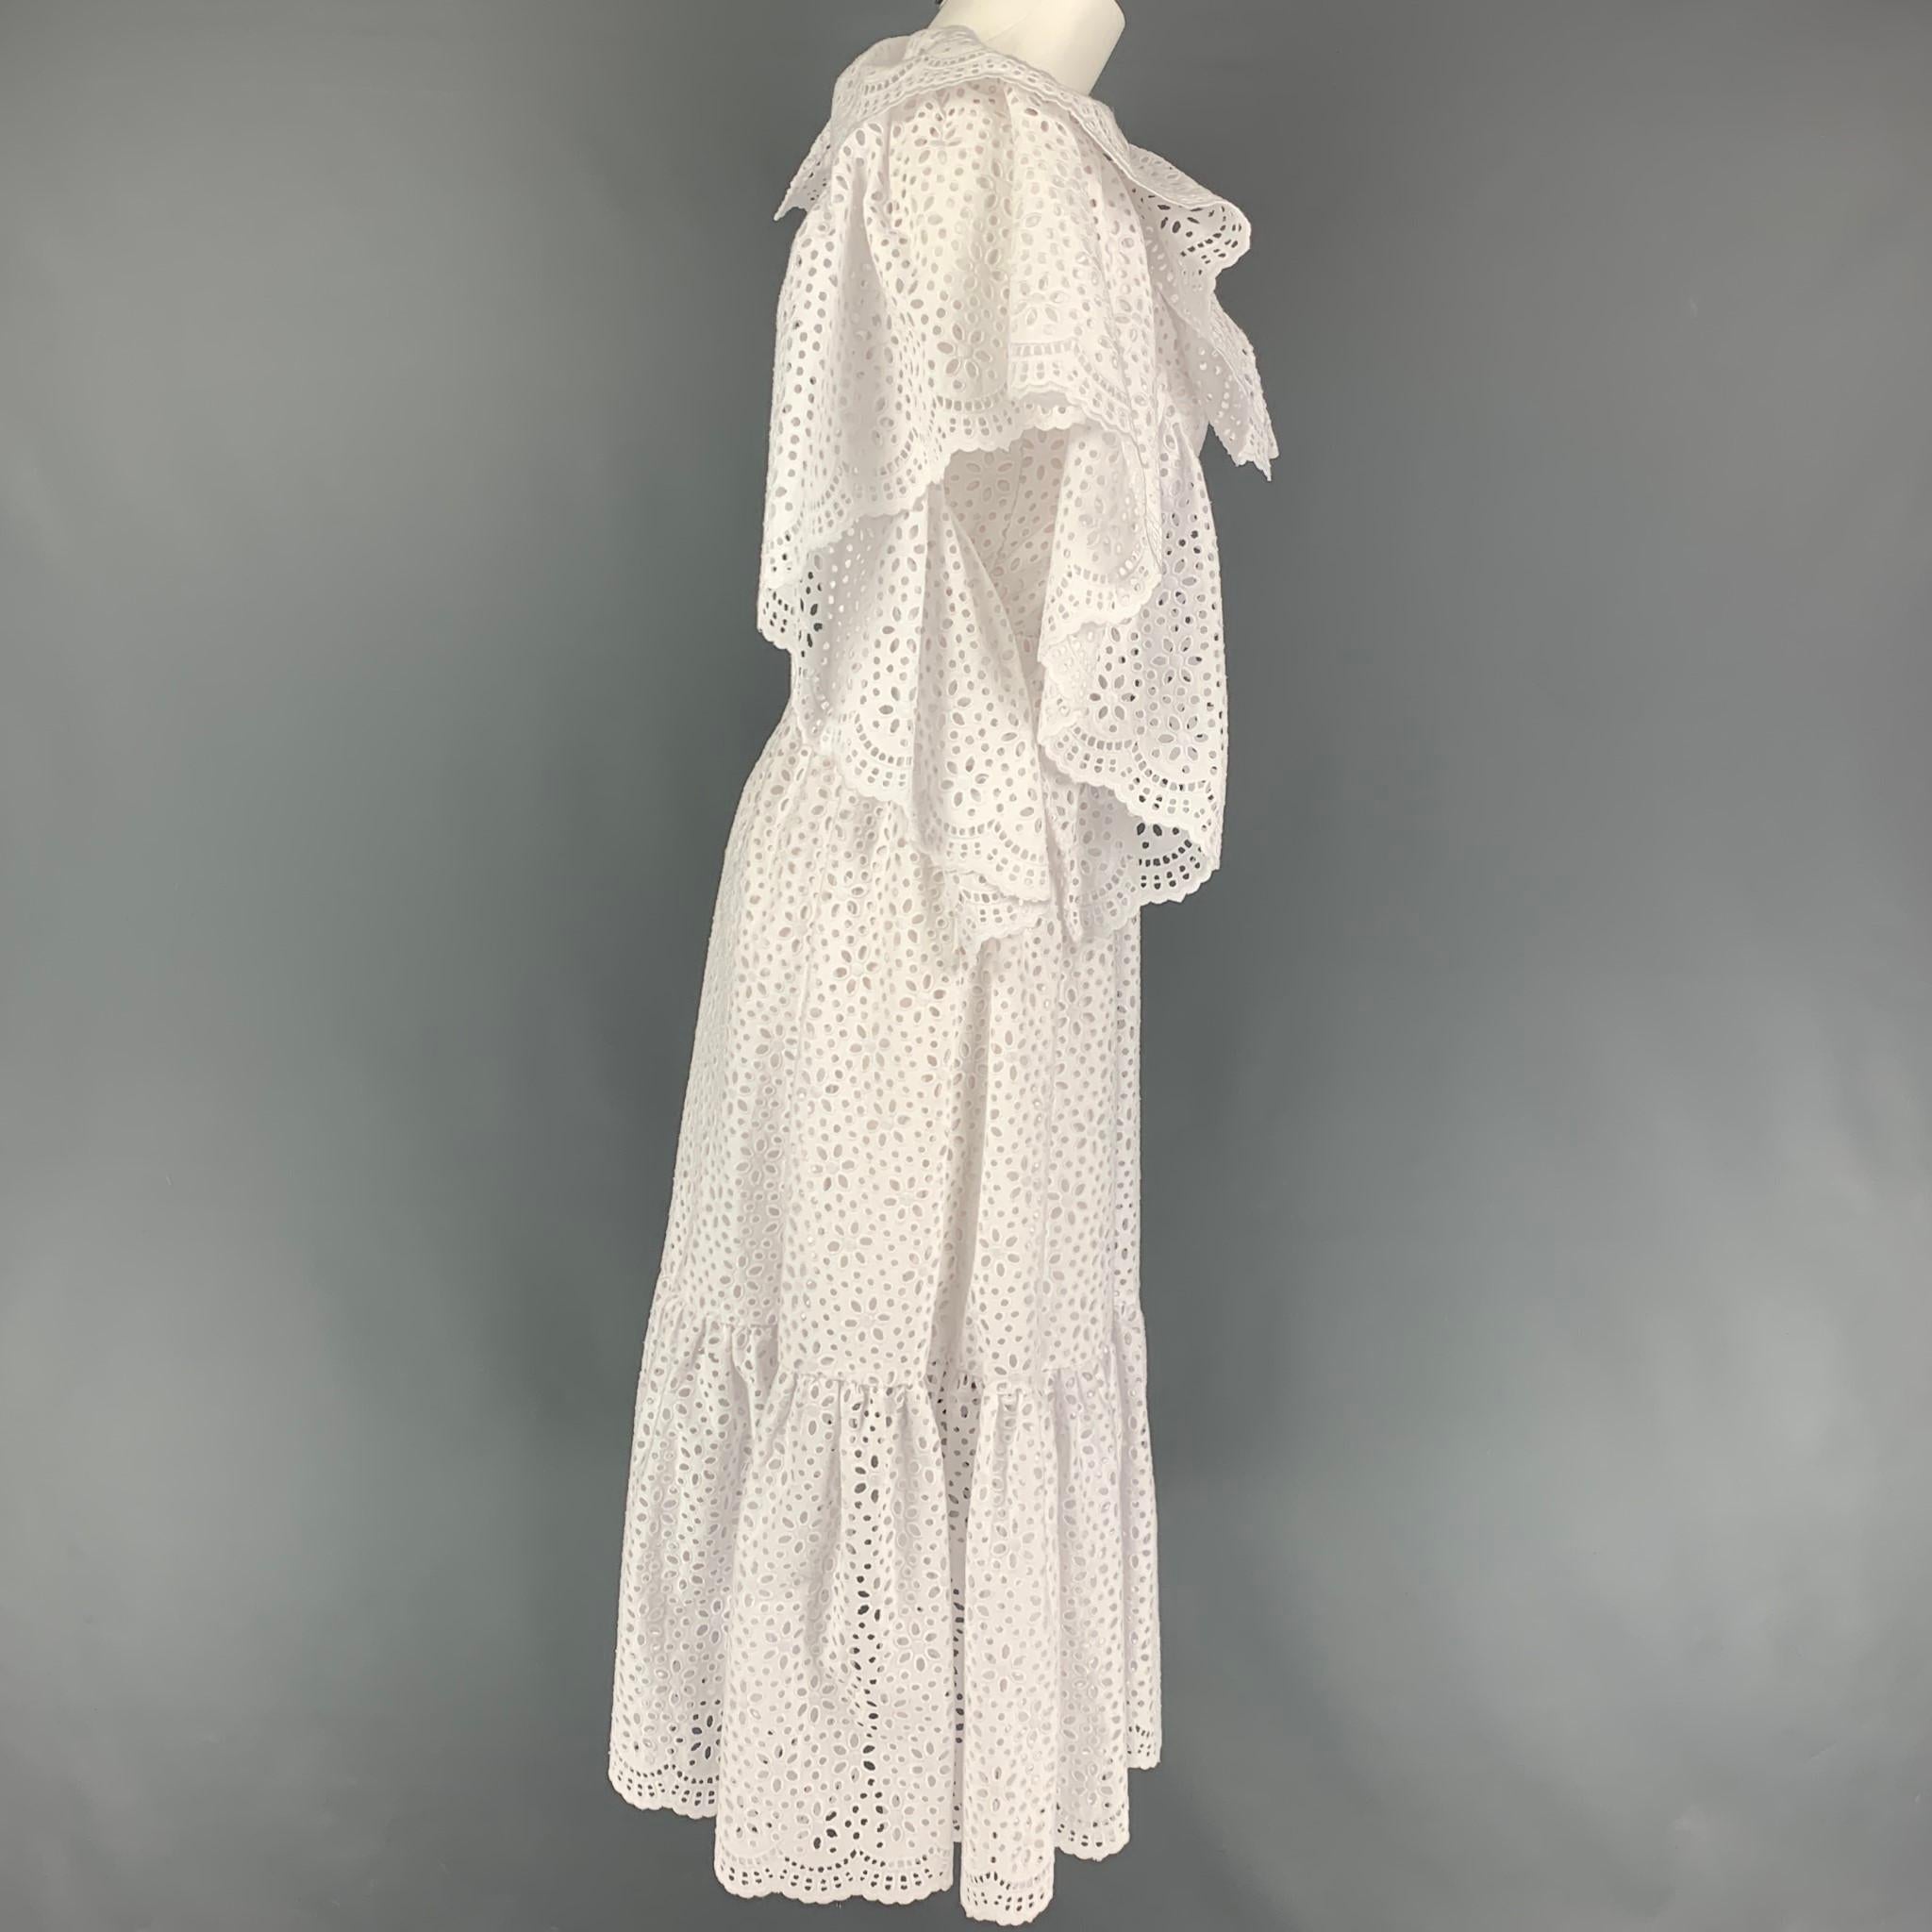 MSGM dress comes in a white eyelet cotton featuring an a-lie style, ruffled details, sleeveless, slit pockets, ad a back zip up closure. 

New With Tags.
Marked: 38
Original Retail Price: $1,300.00

Measurements:

Shoulder: 11 in.
Bust: 32